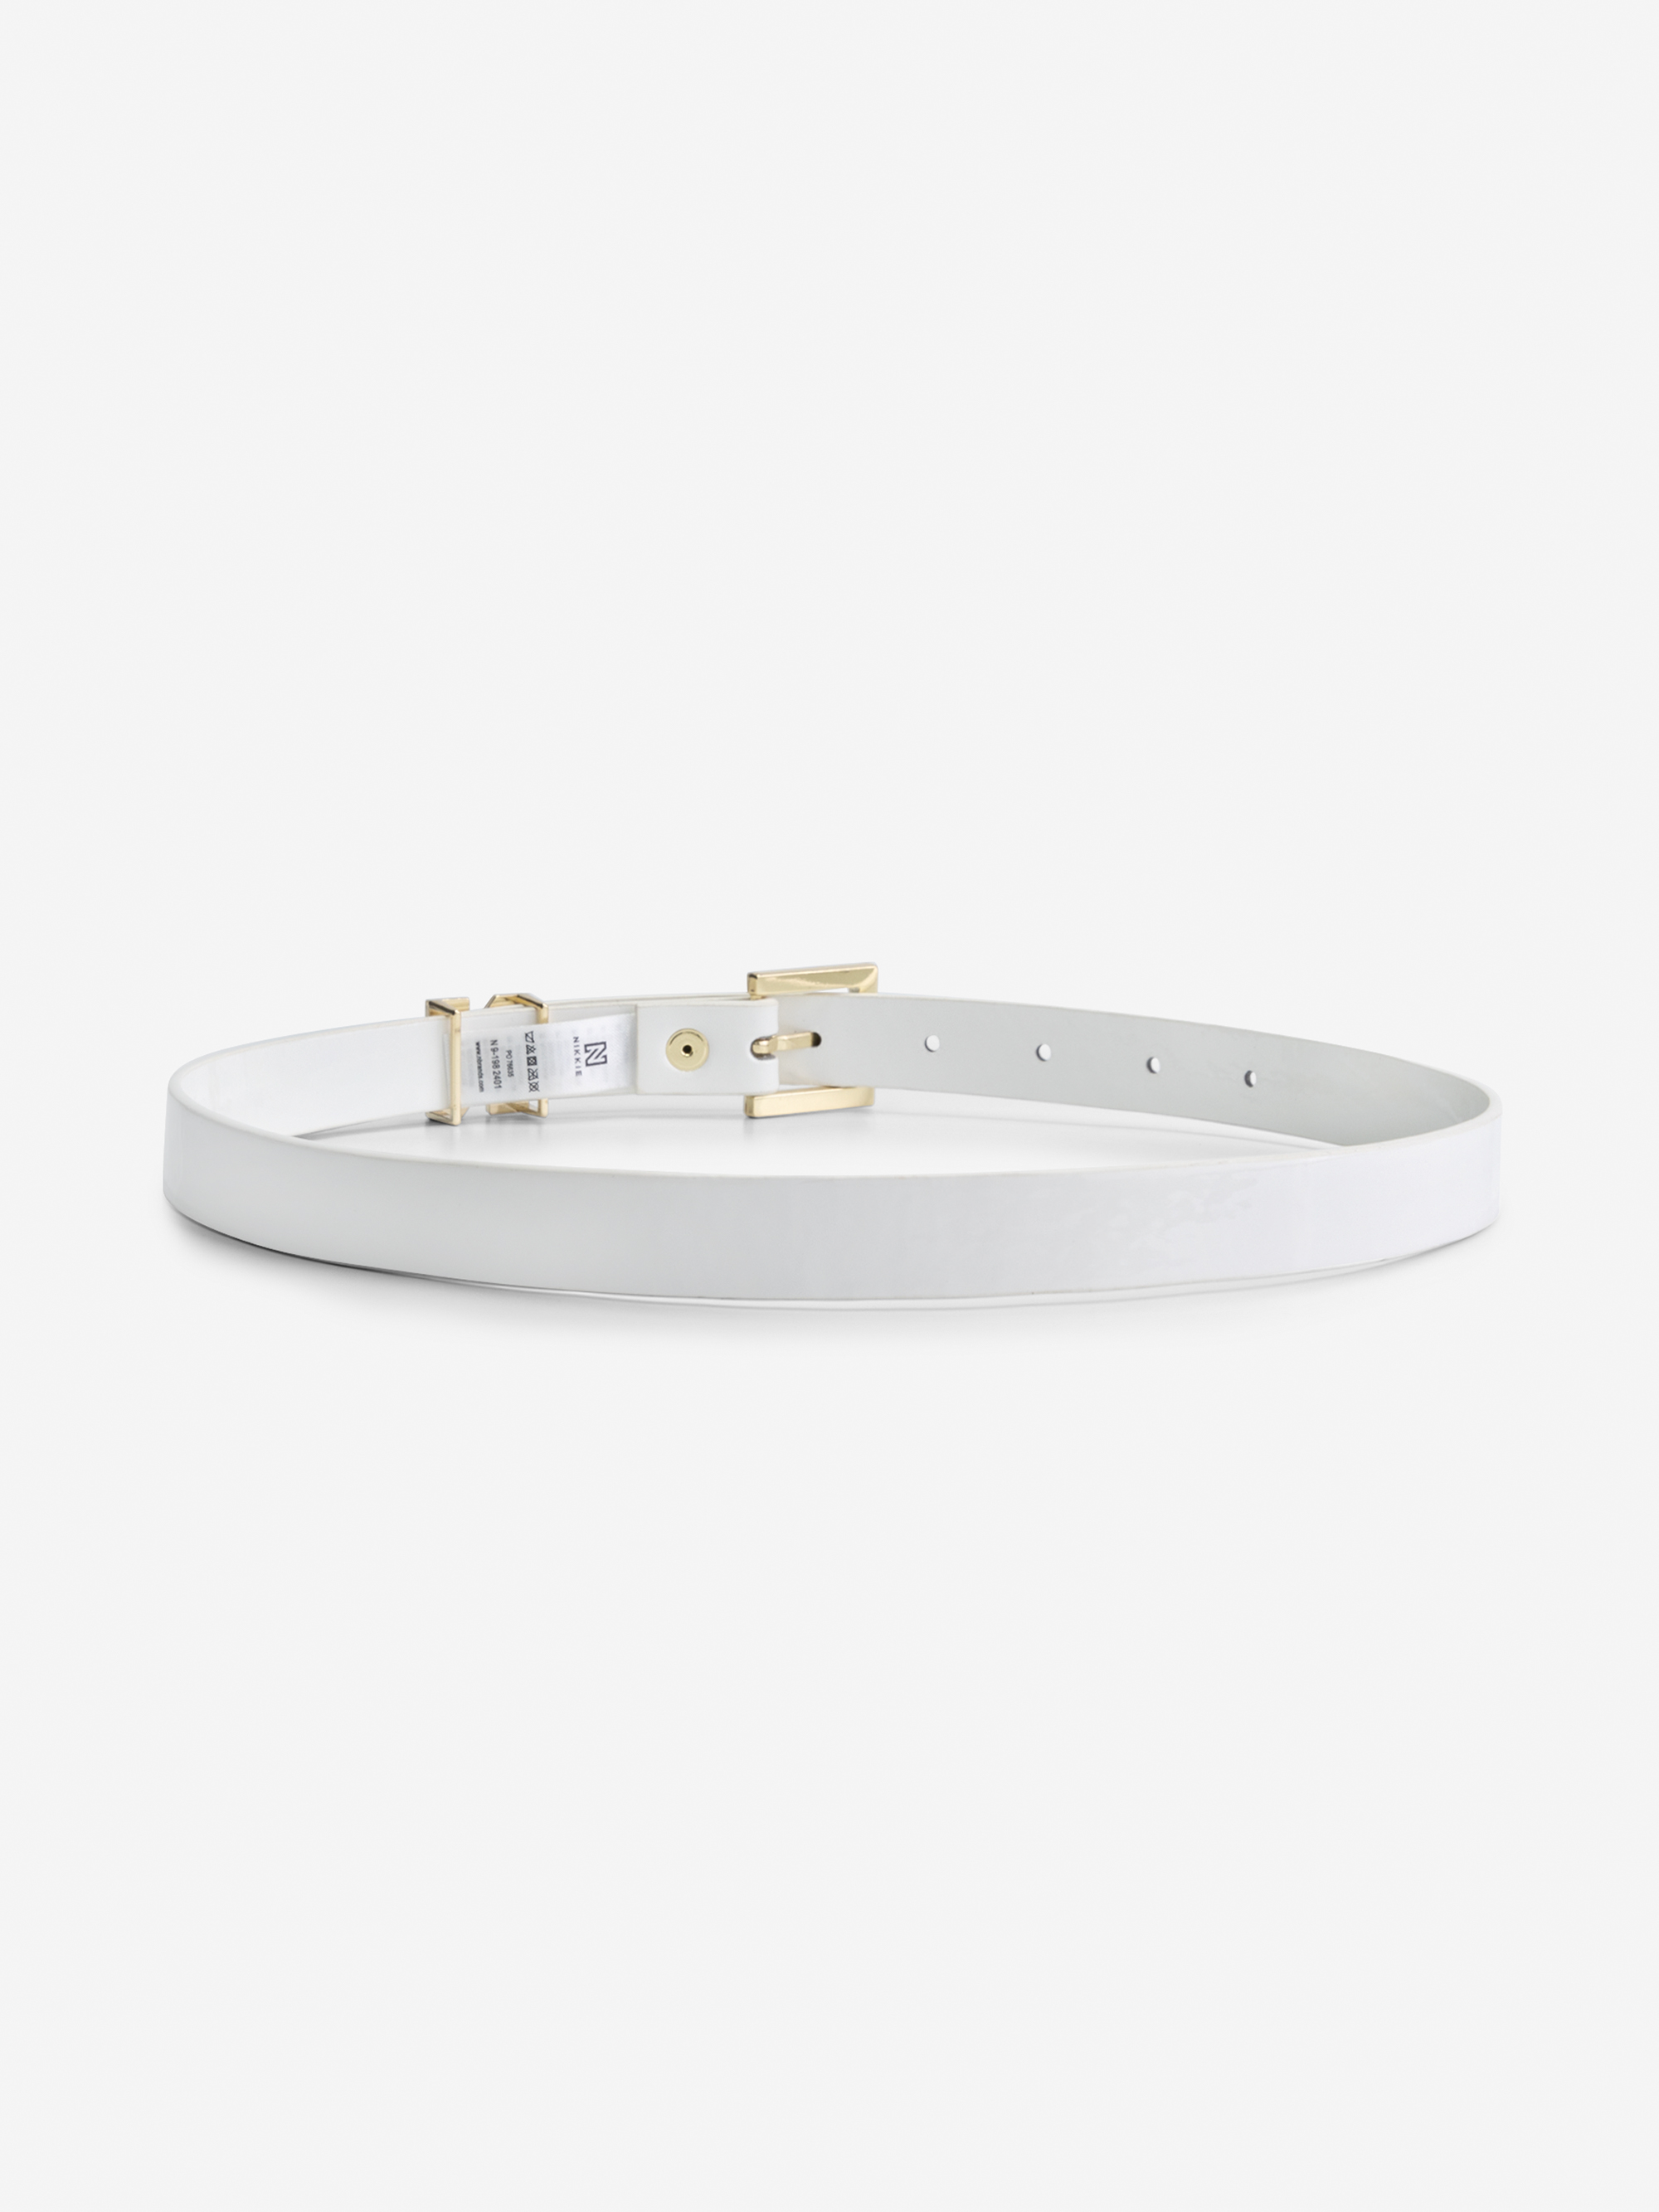 Lacquer Waist belt with N slide